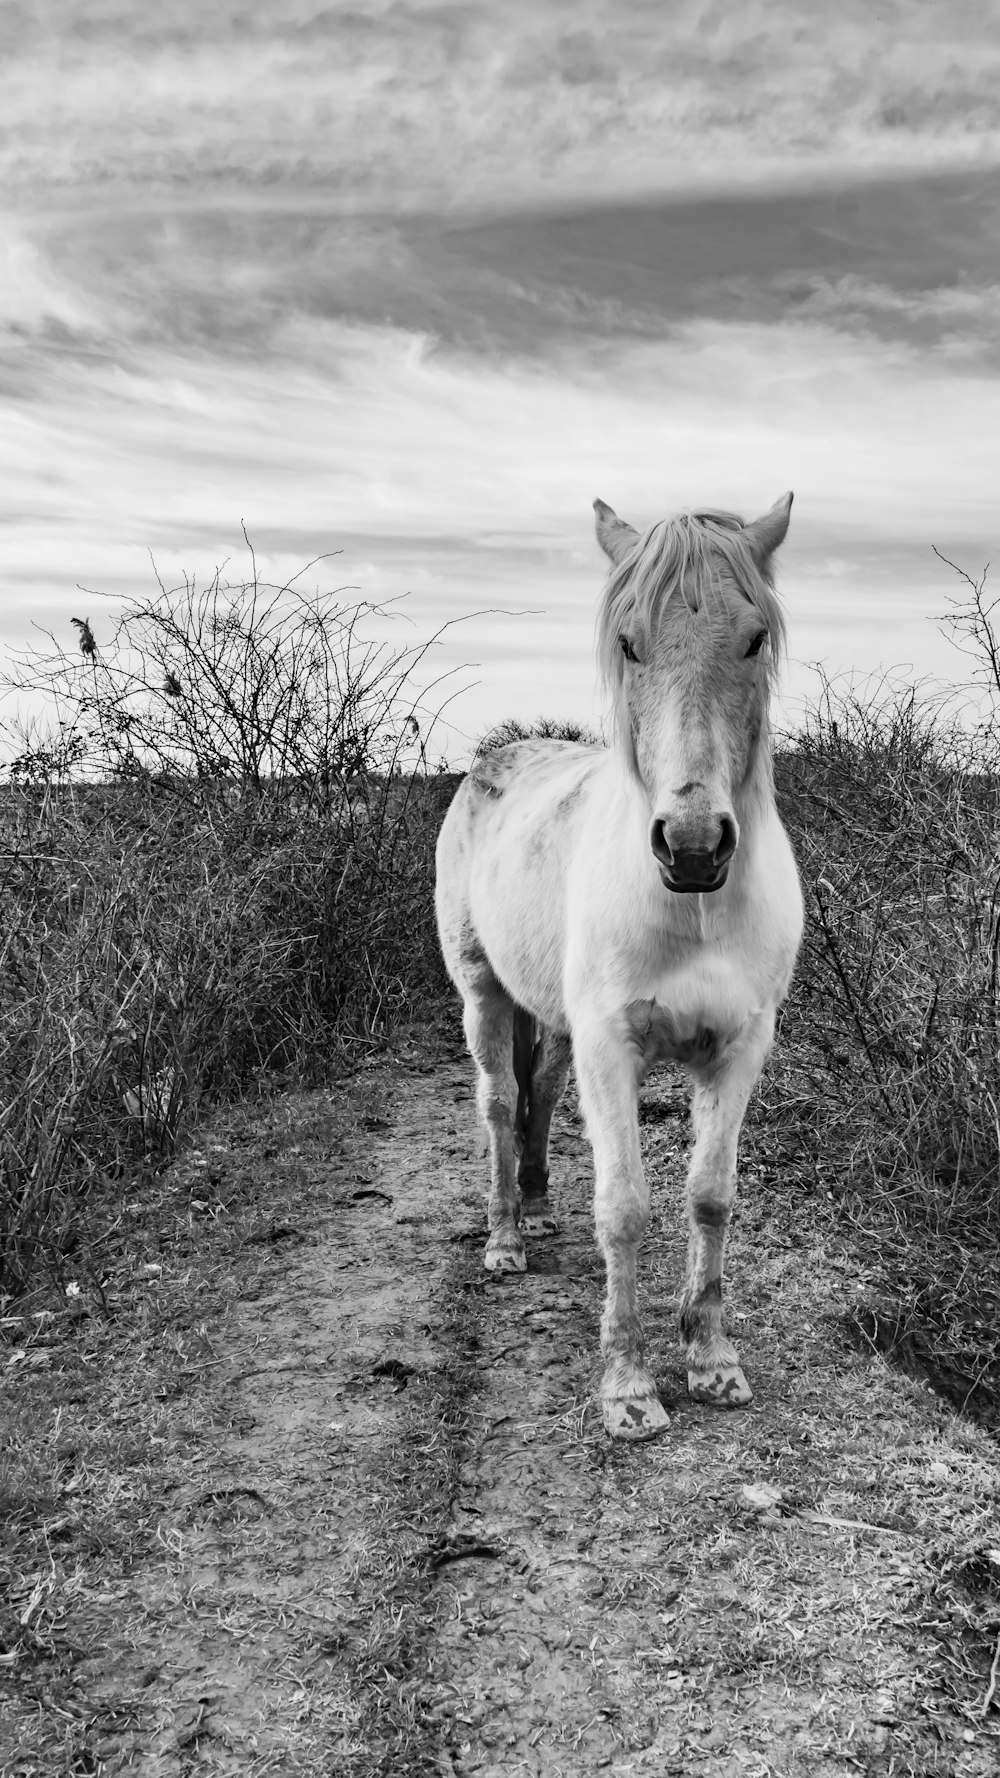 a white horse standing on a dirt road